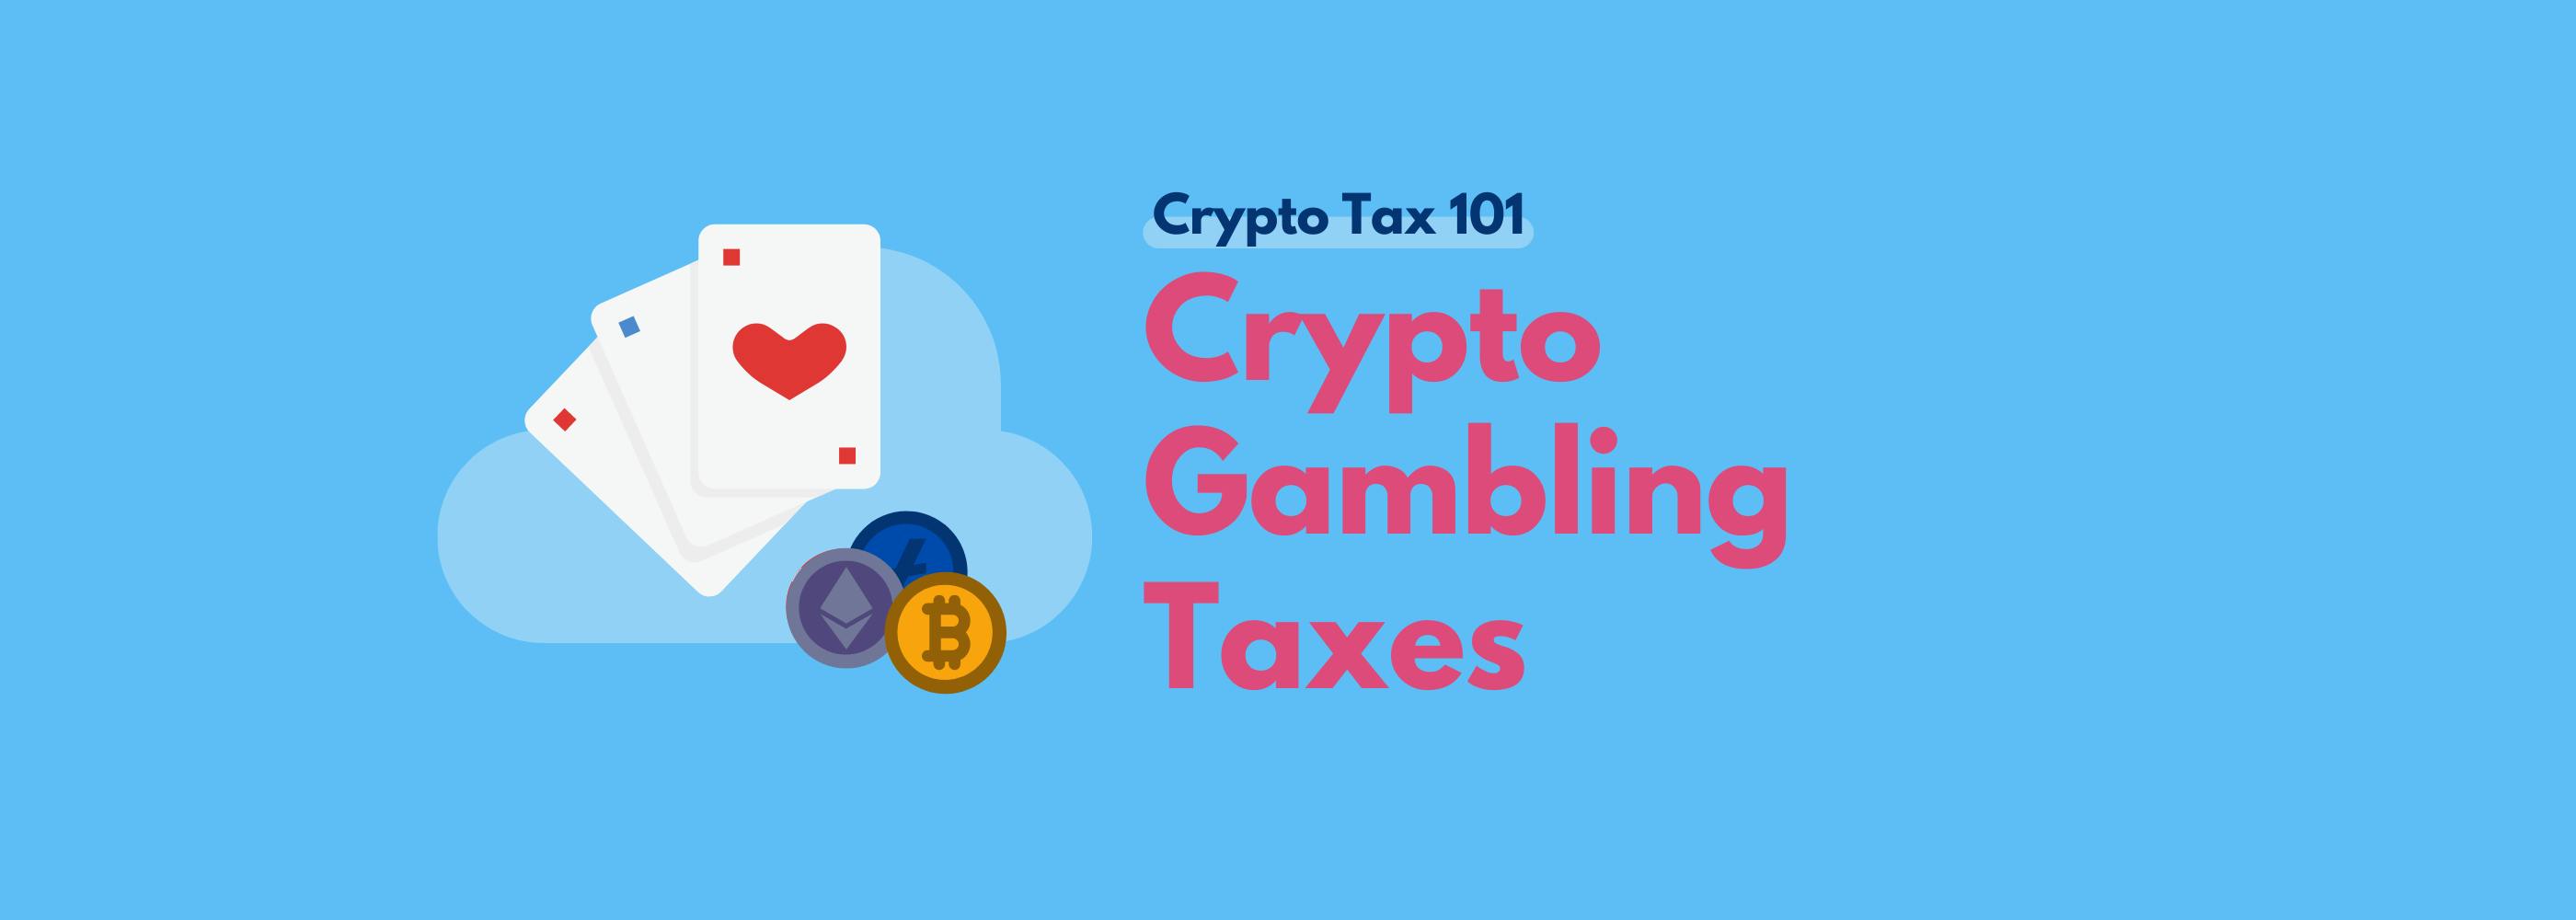 crypto-gambling-how-it-s-taxed-koinly